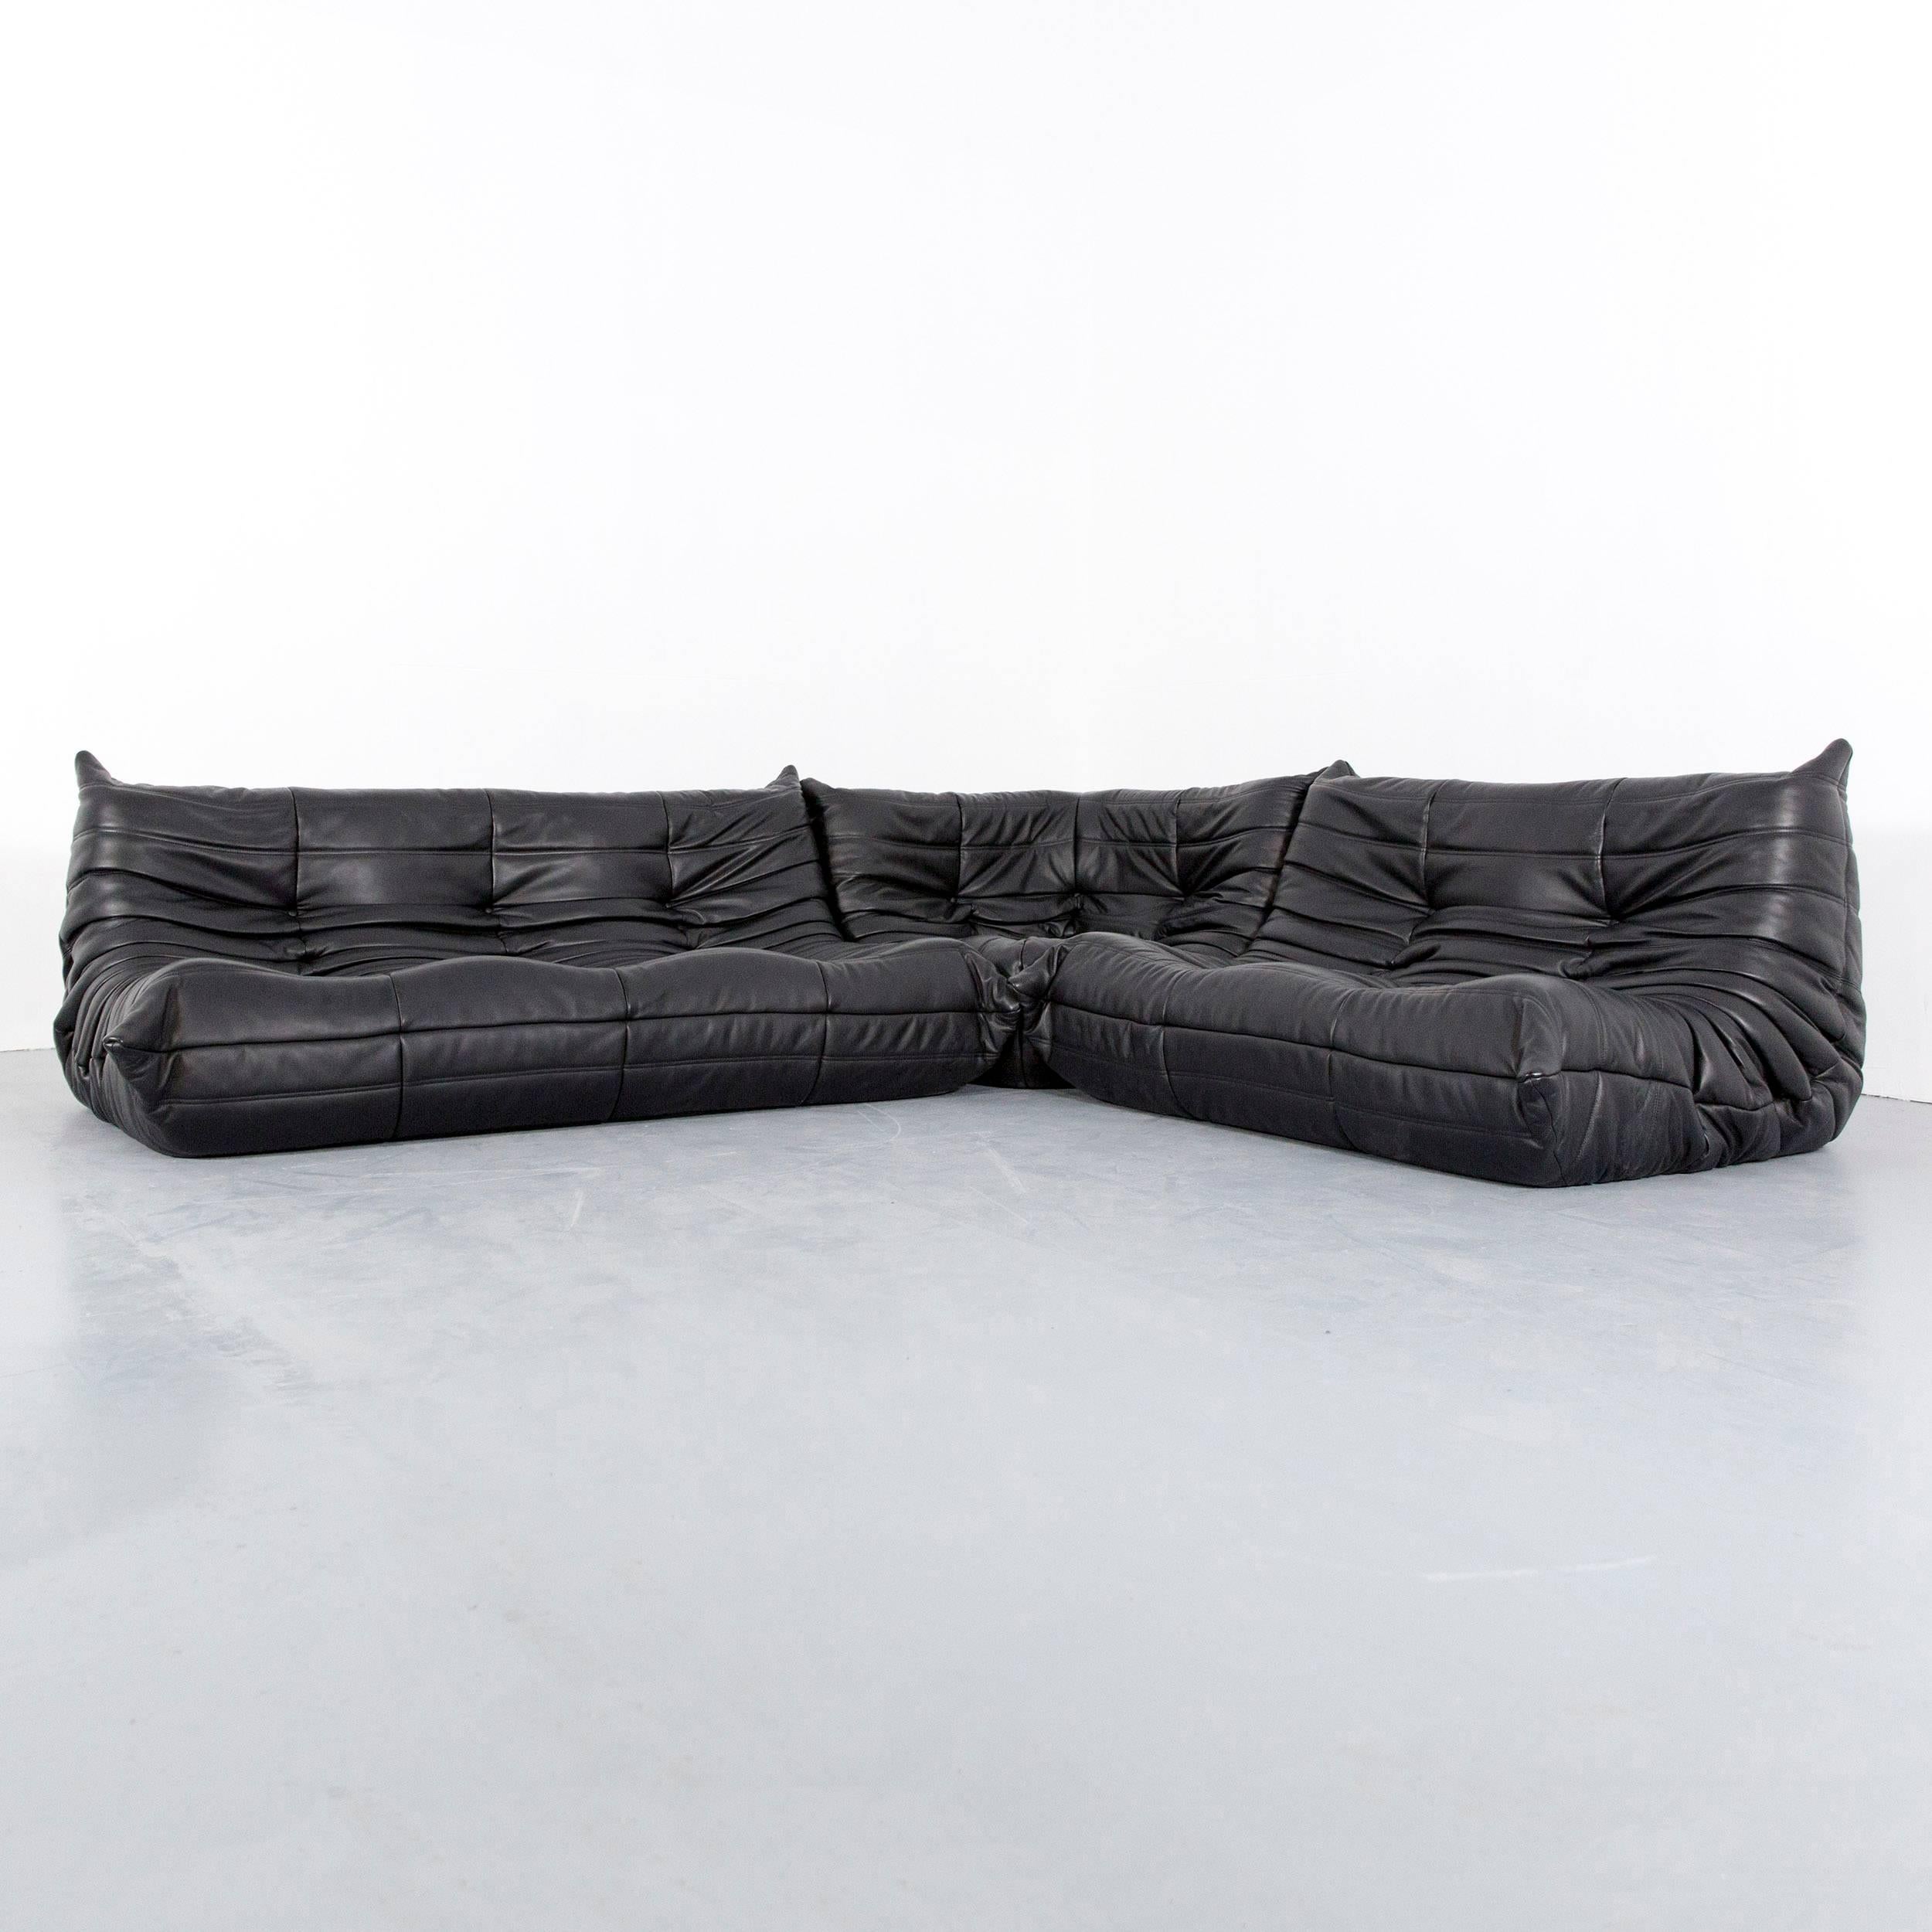 Ligne Rose Togo designer sofa black leather two-seat retro Classic sofa couch, in a minimalistic and modern design, made for pure comfort and flexibility.